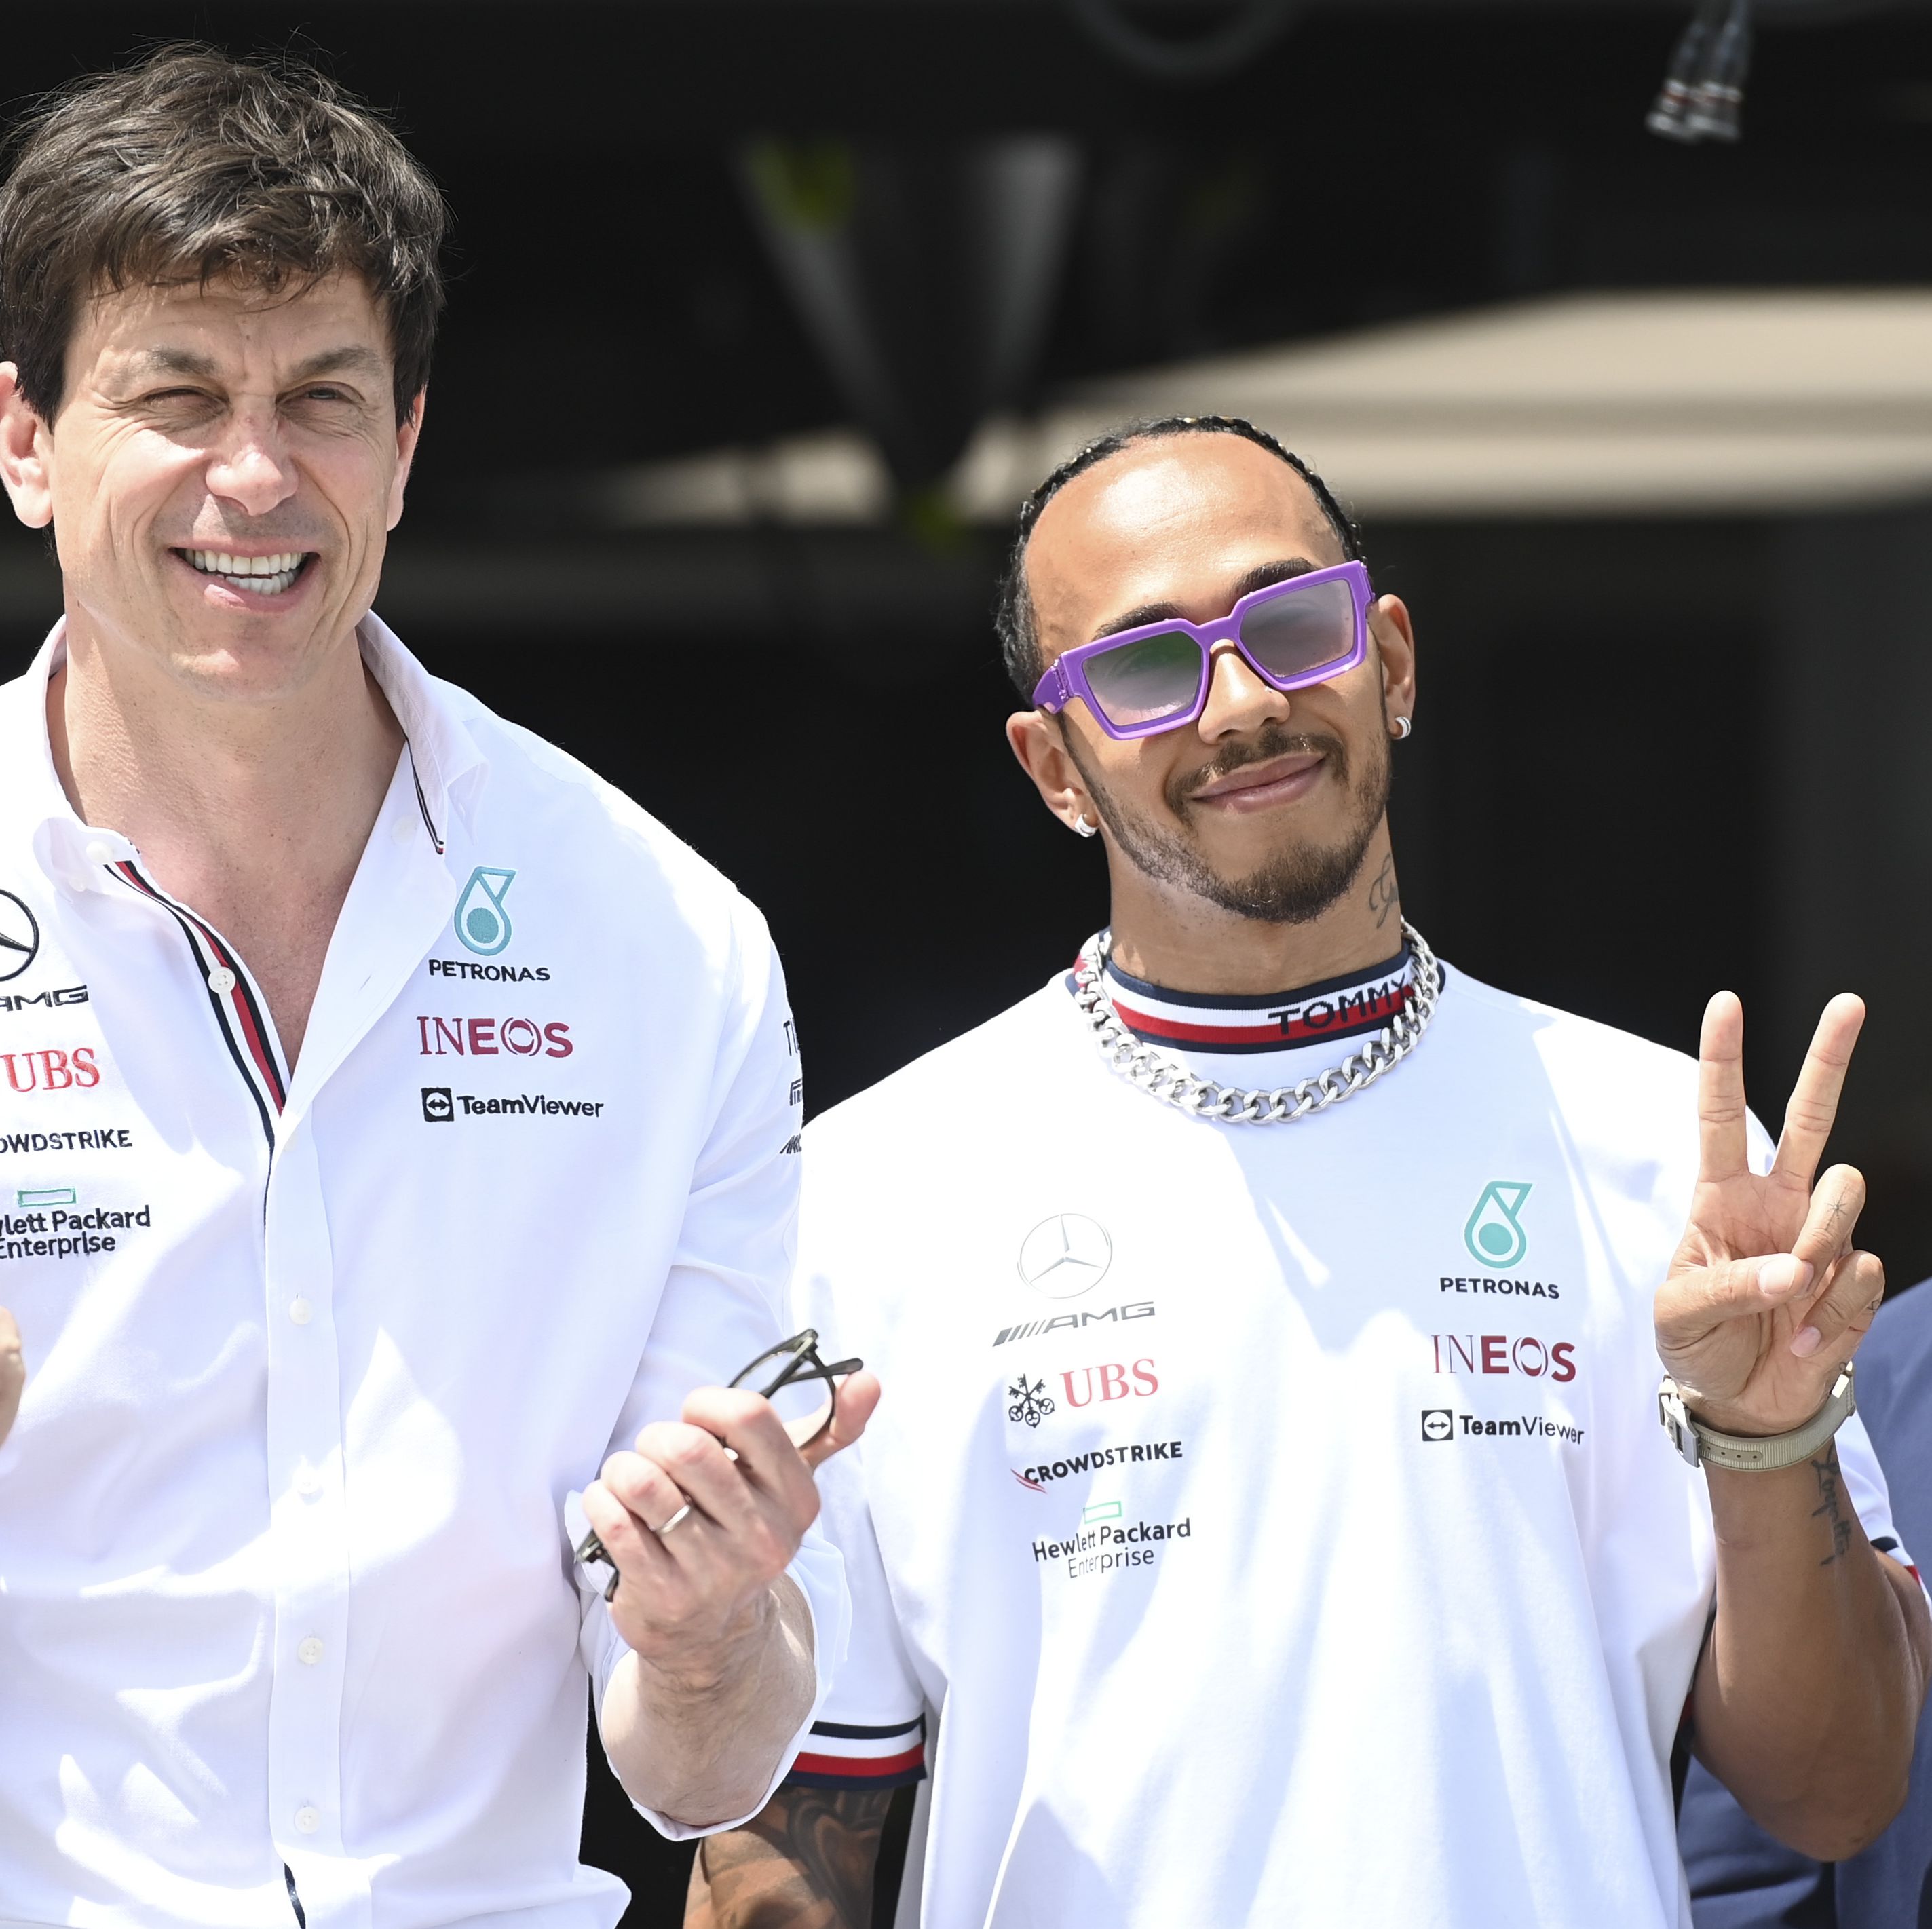 Lewis Hamilton Told Toto Wolff About Ferrari Just One Day Before Public Announcement